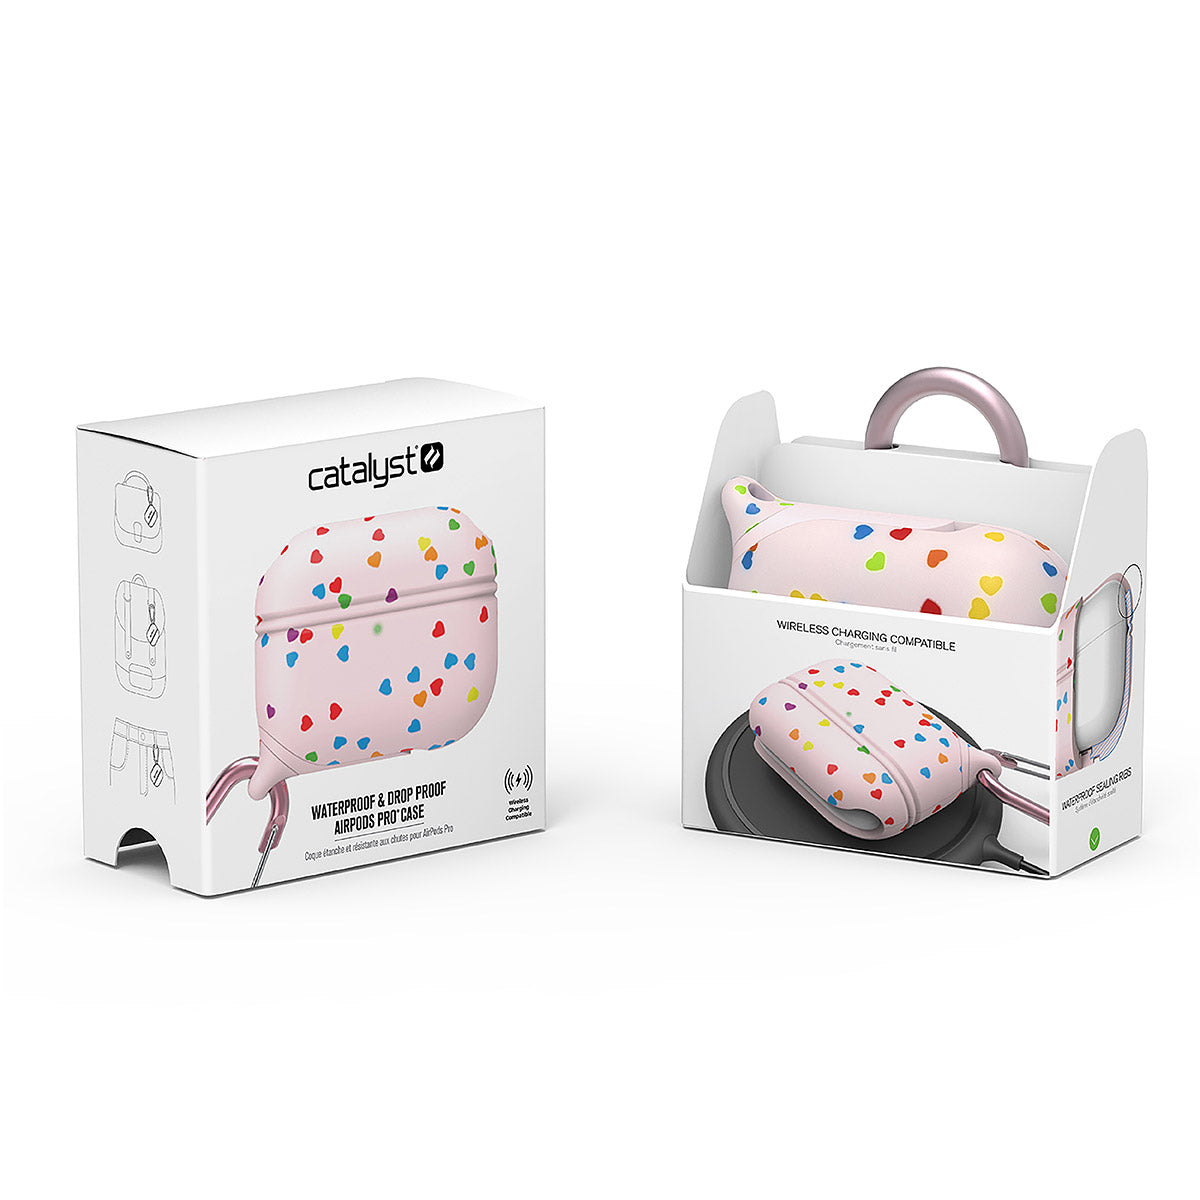 CATAPLAPDPROSWT | catalyst airpods pro gen 2 1 waterproof case carabiner special edition pink with hearts packaging